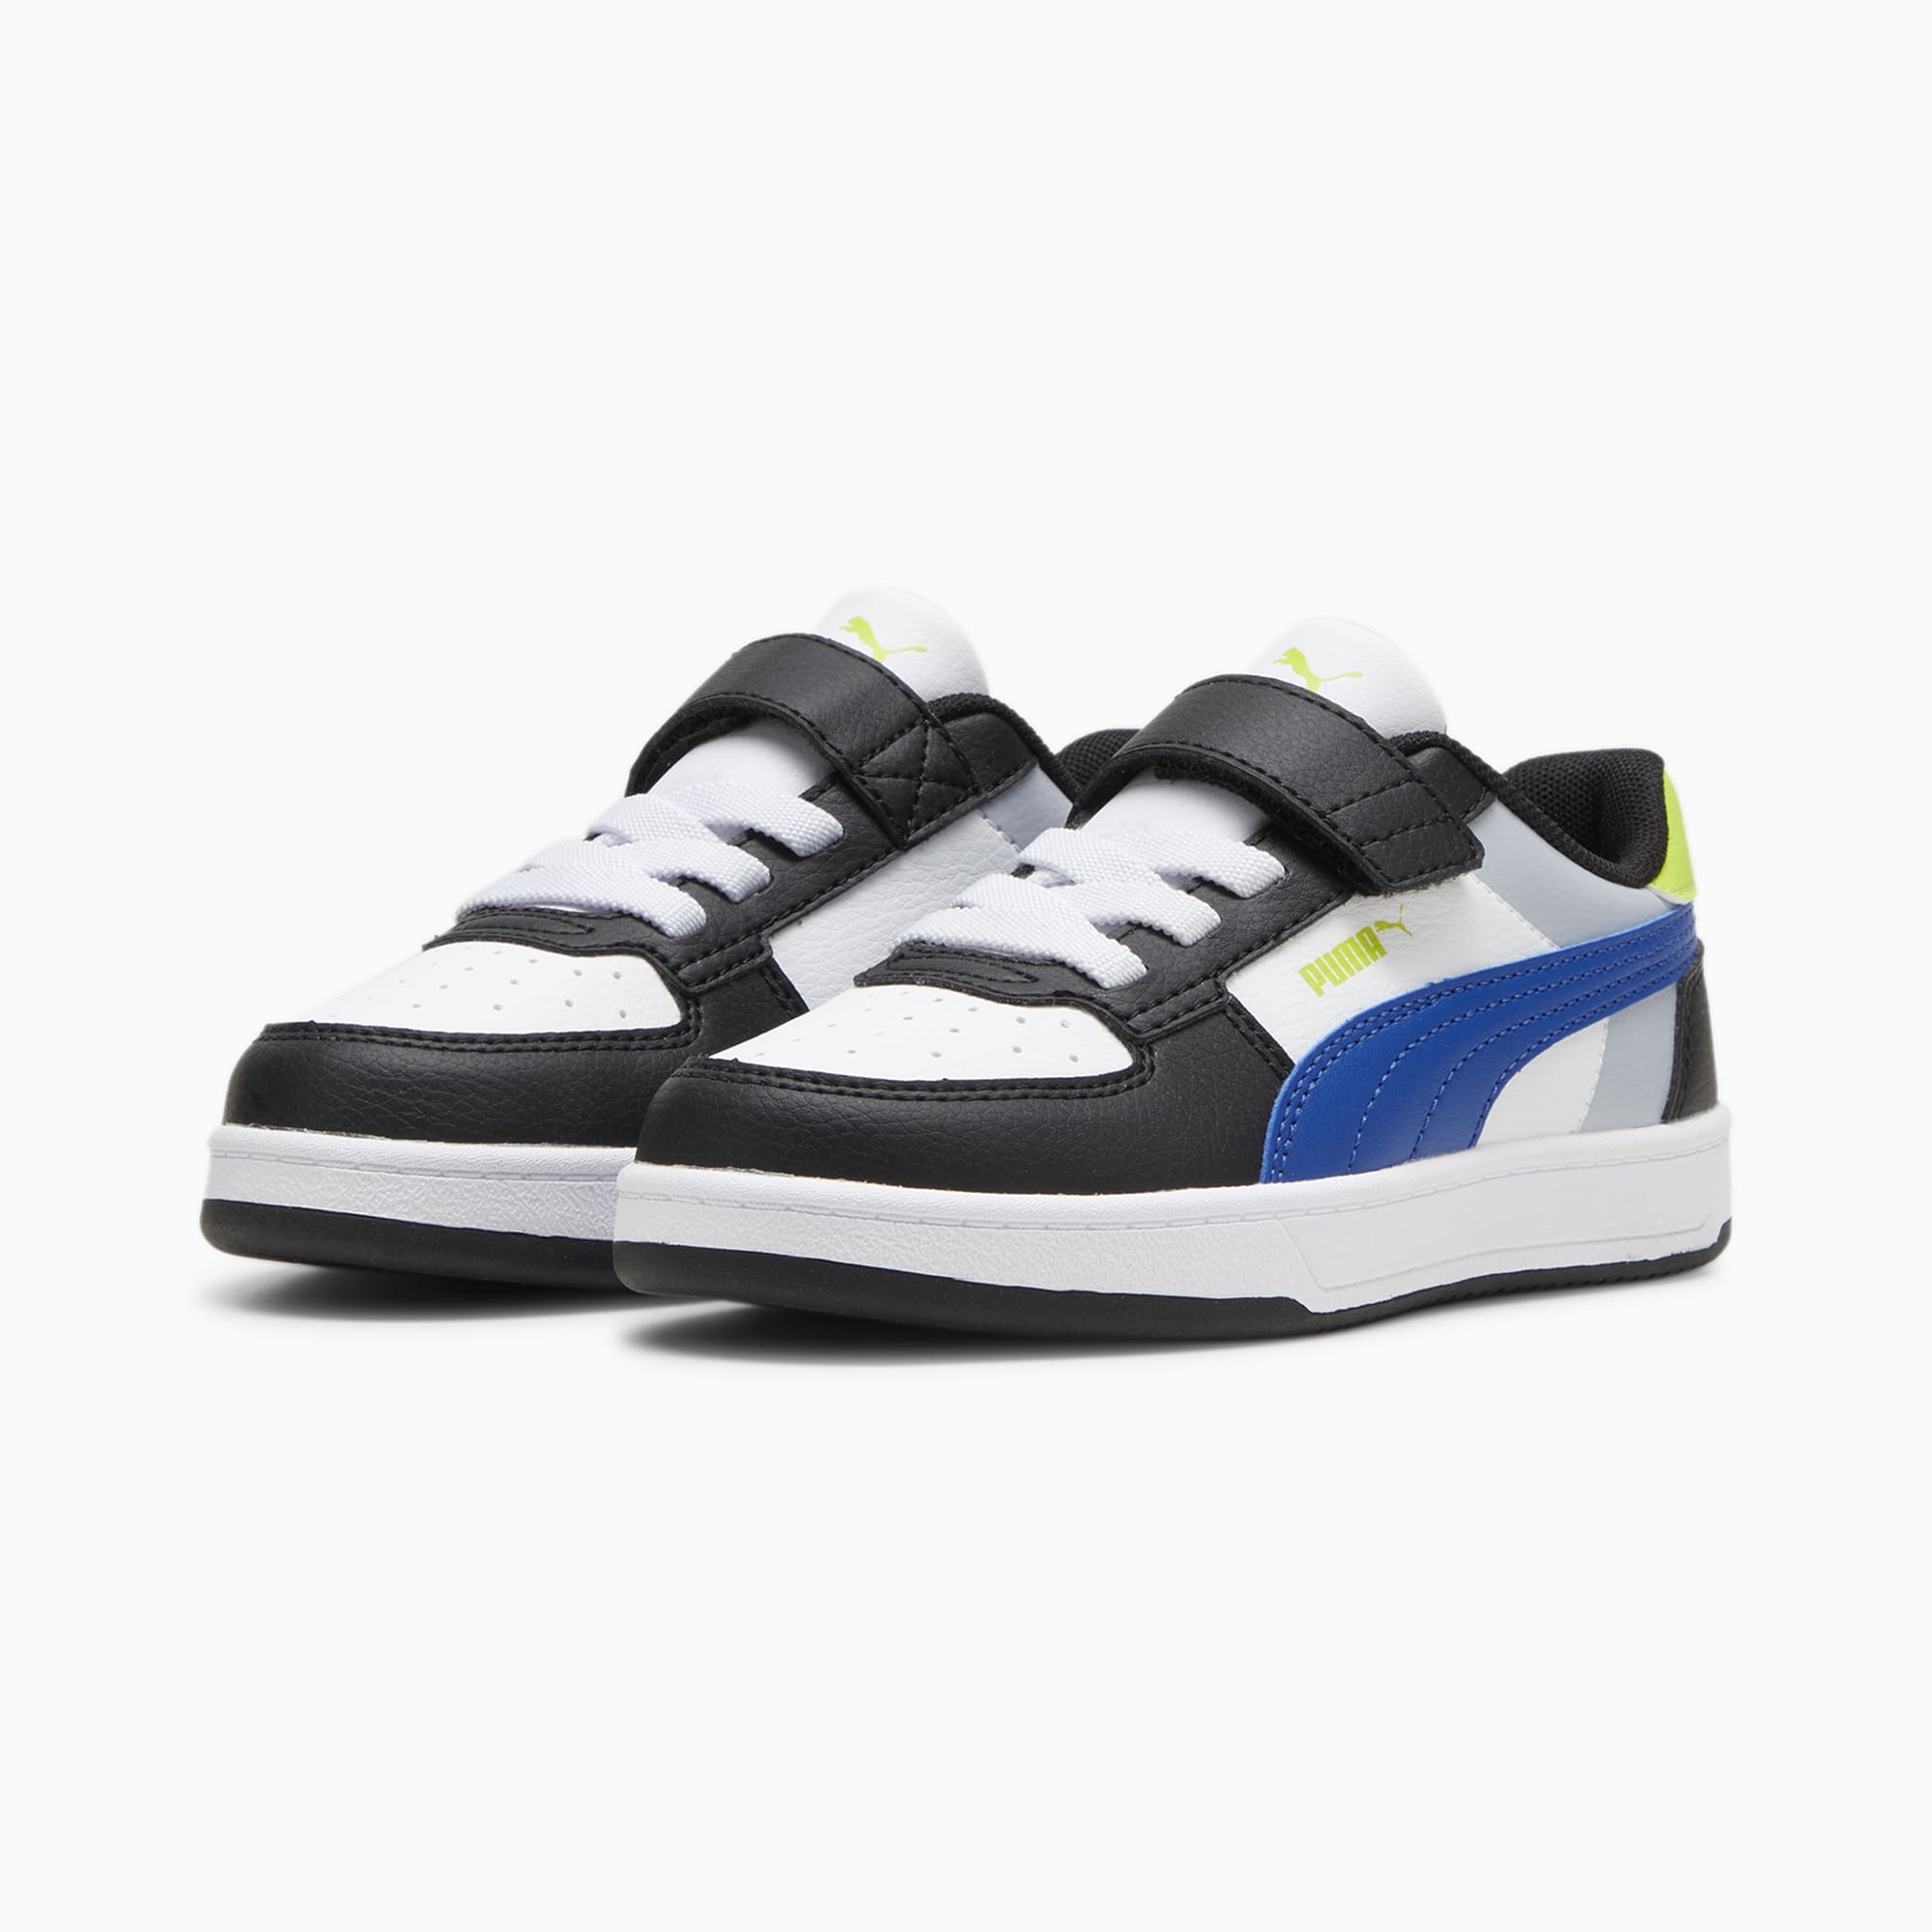 Buy Puma Caven 2.0 Mid PS Sneakers (11.5-3) Boys Footwear from Puma. Find  Puma fashion & more at